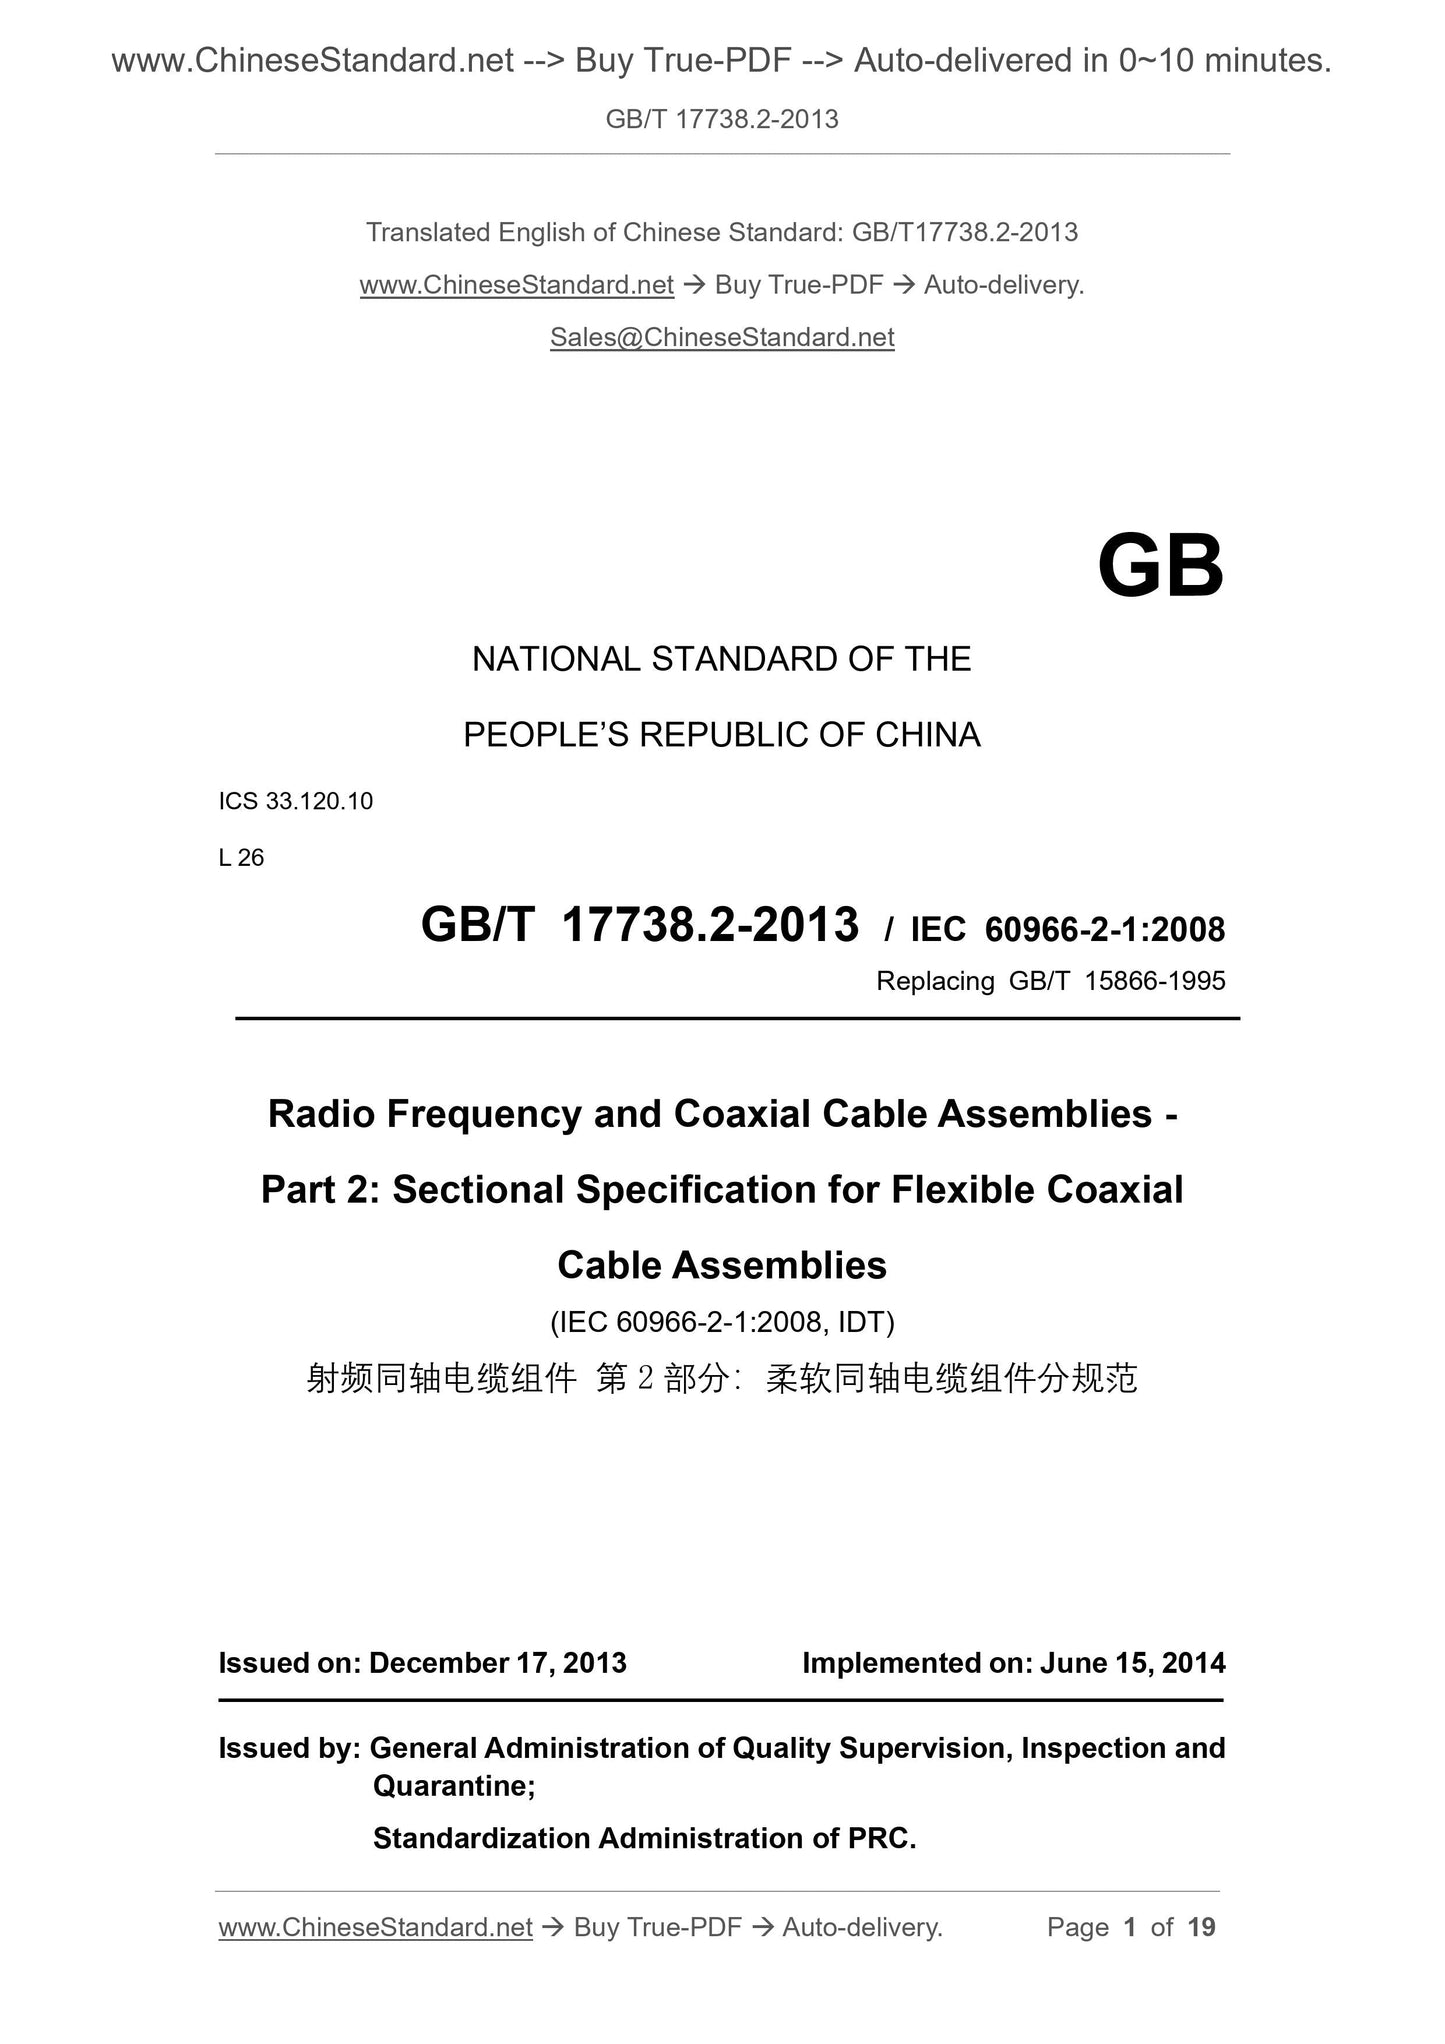 GB/T 17738.2-2013 Page 1